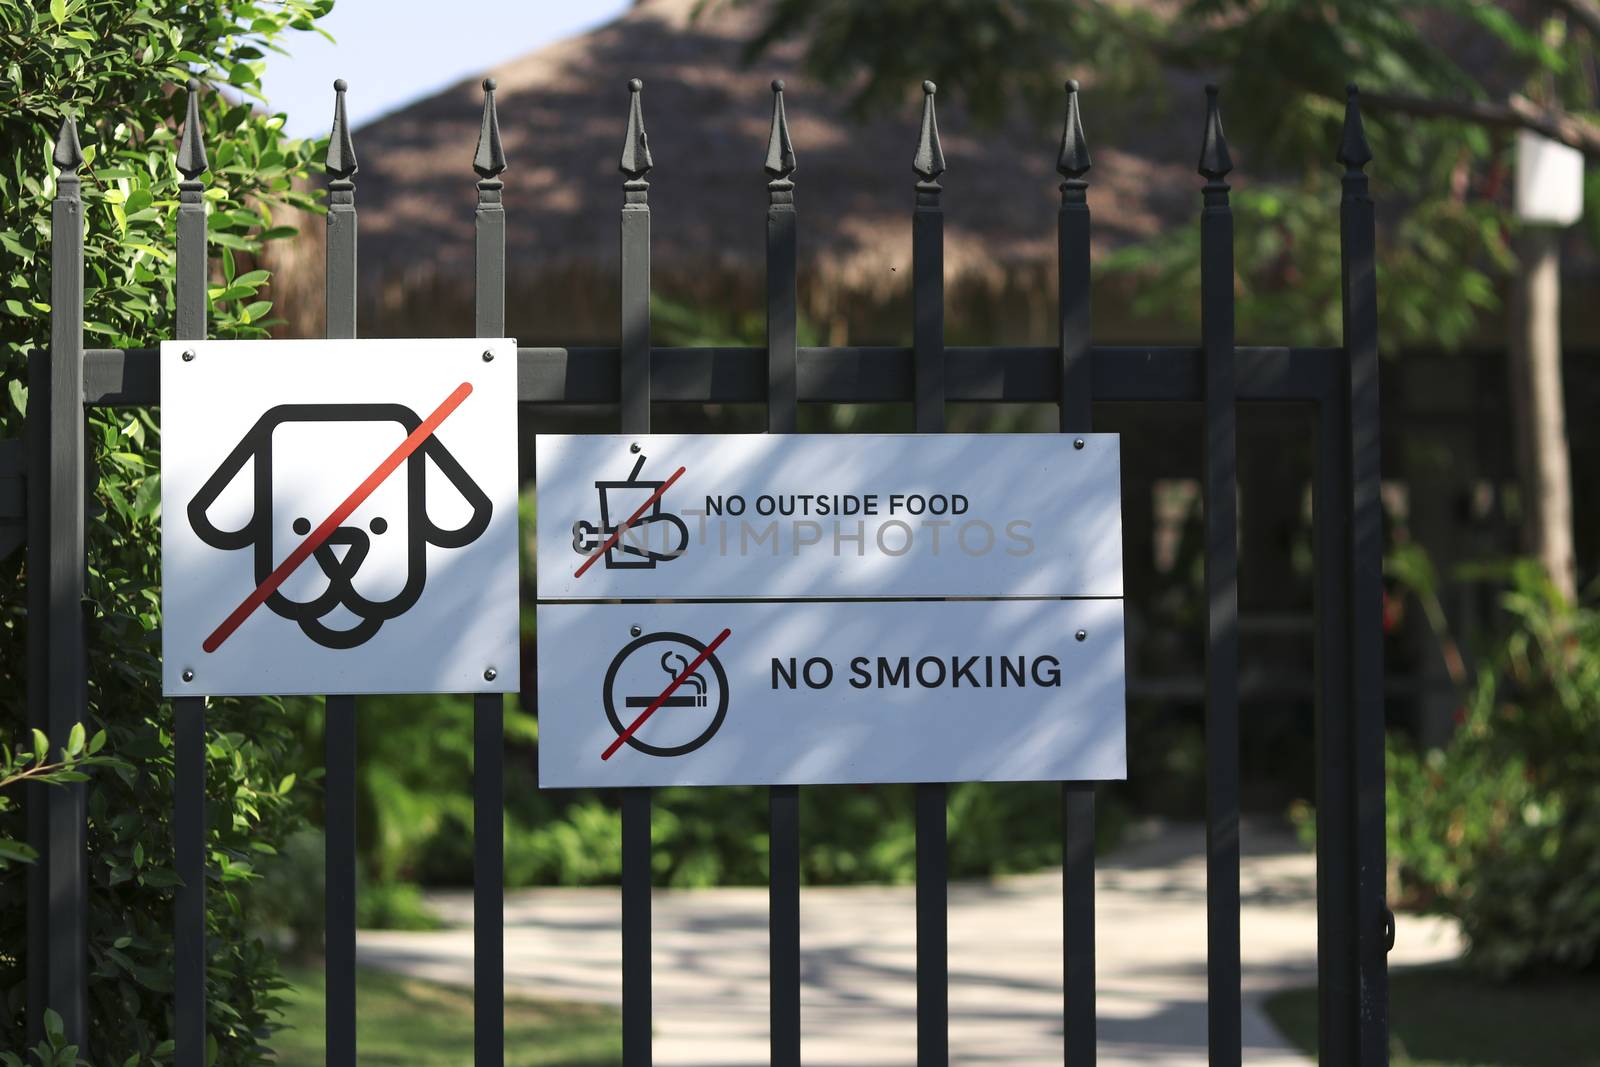 Signs showing no pets, no food from outside and do not smoke Installed at the entrance.